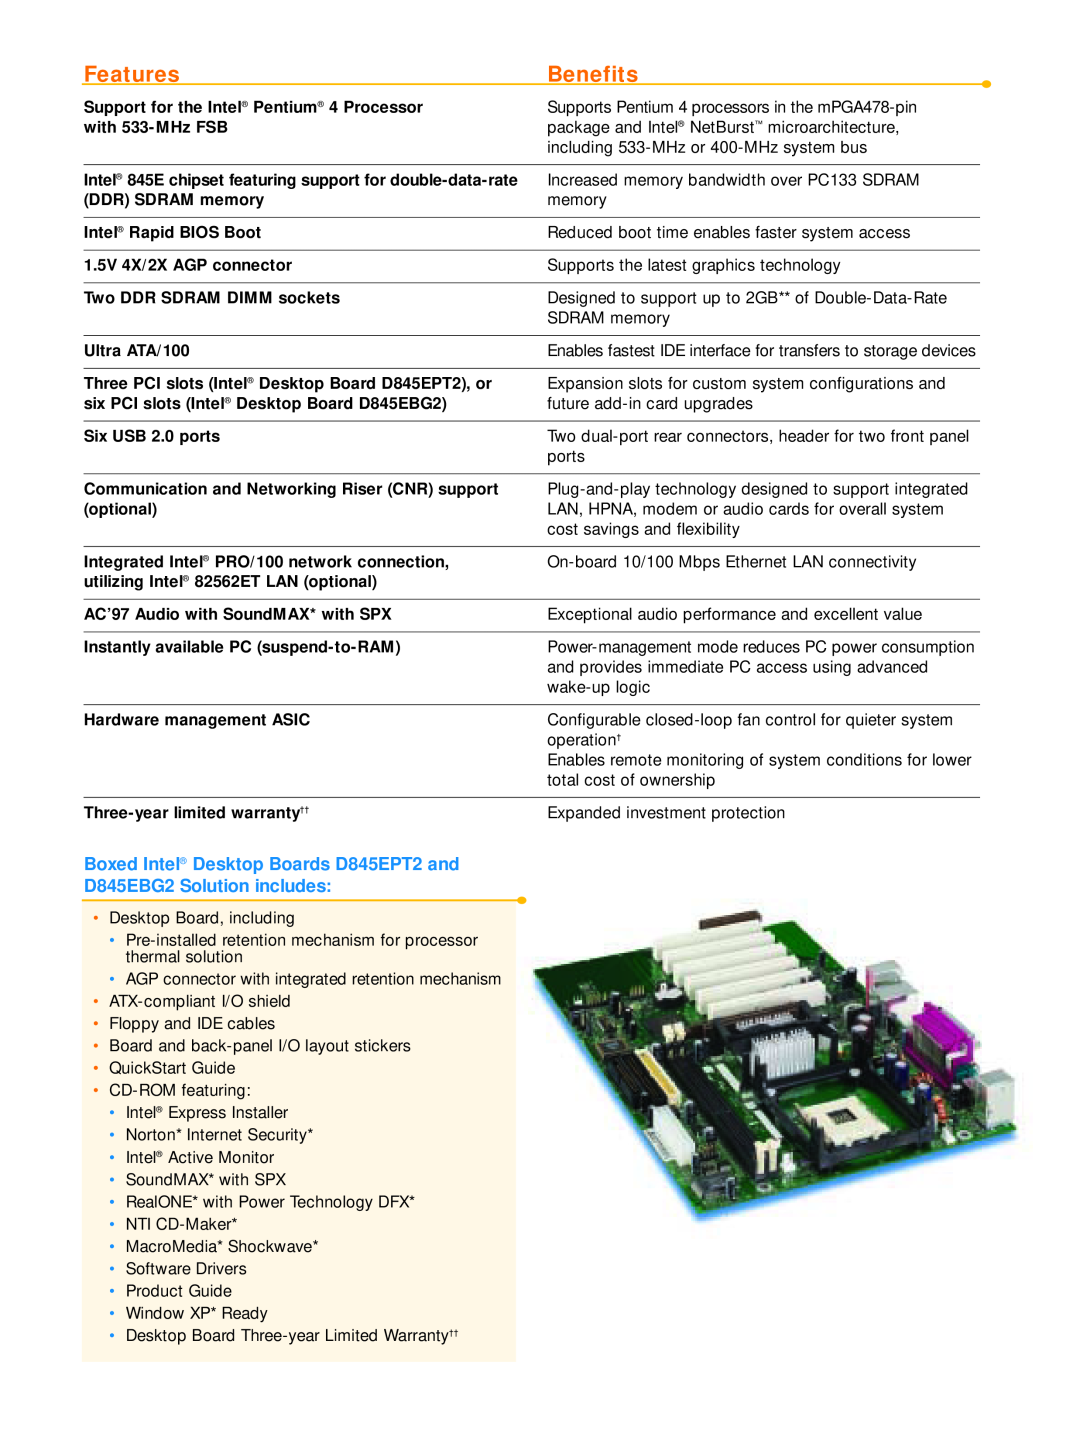 Intel manual Features, Benefits, Boxed Intel Desktop Boards D845EPT2 and, D845EBG2 Solution includes 